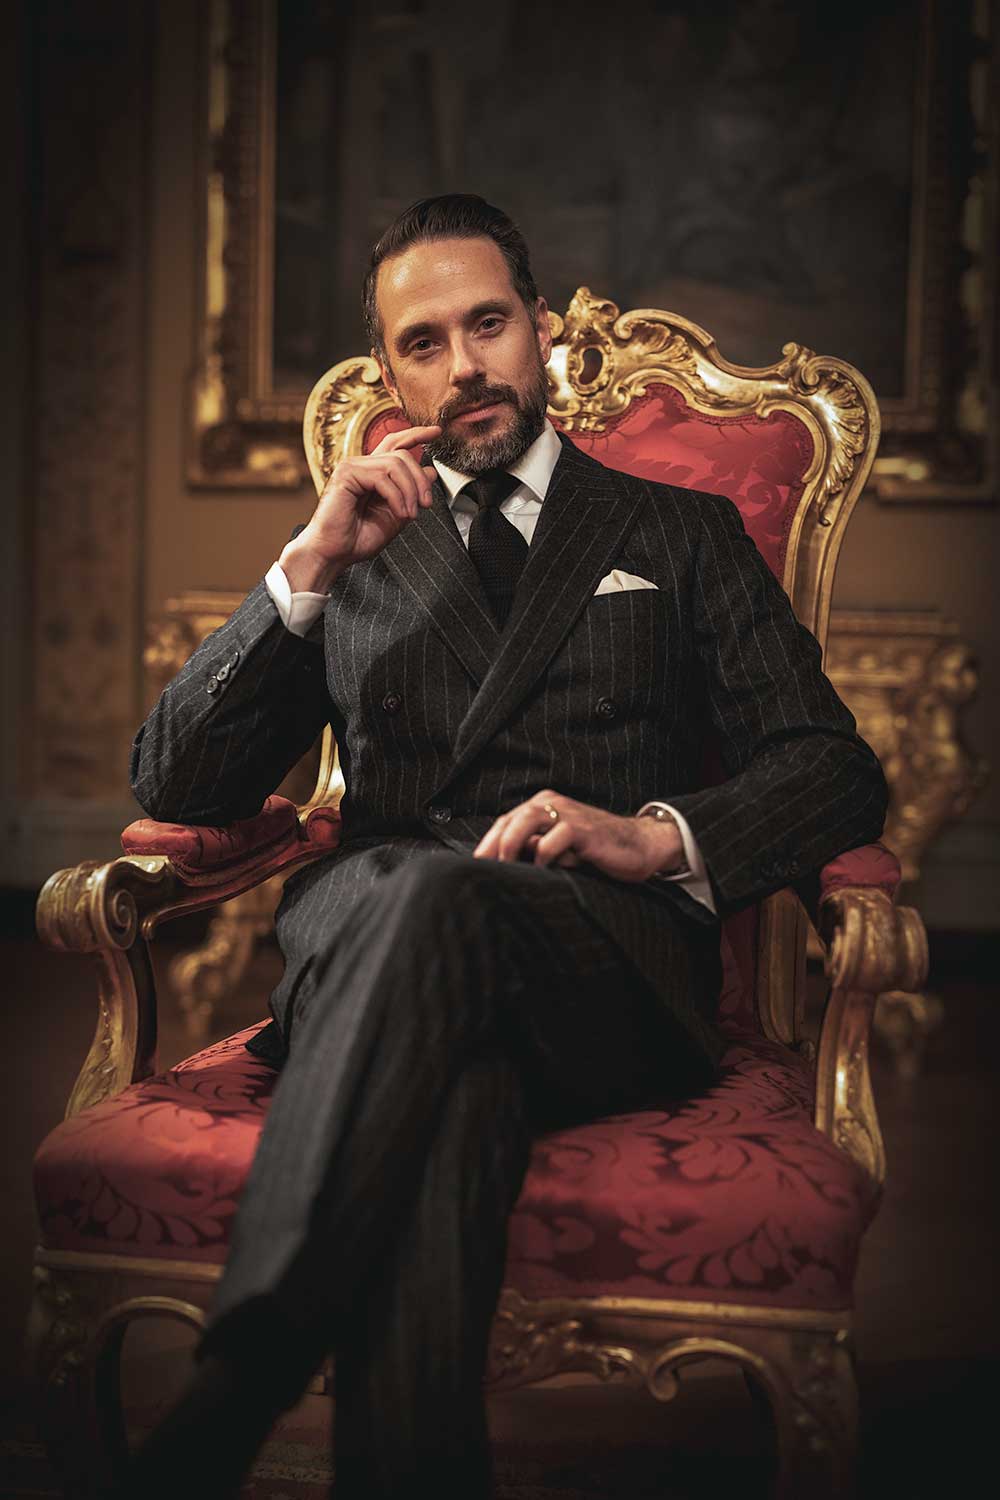 brian sacawa sitting in an ornate chair wearing a db gray chalkstripe flannel suit